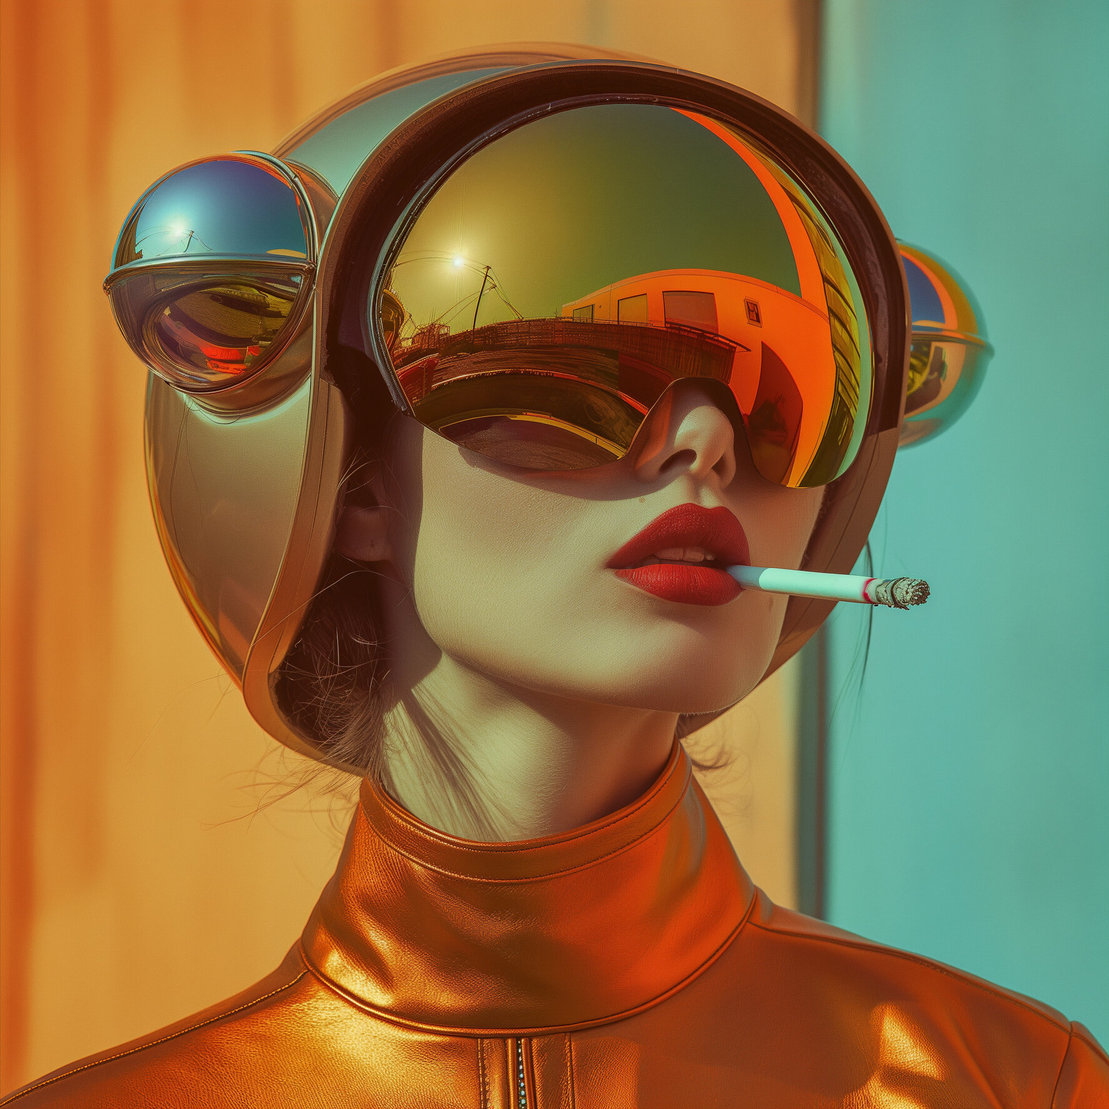 a fashion photo model smoking about big futuristic retro sunglasses, high neck leather top, shiny plastic helmet, minimalistic bauhaus style in wes anderson colors orange, gold blue green, spherical sculptures, futuristic glam, 8k photo, sharp, hiper realism Job ID: 04eb39f6-19bf-4a4d-9be4-3a4cb0348d5a